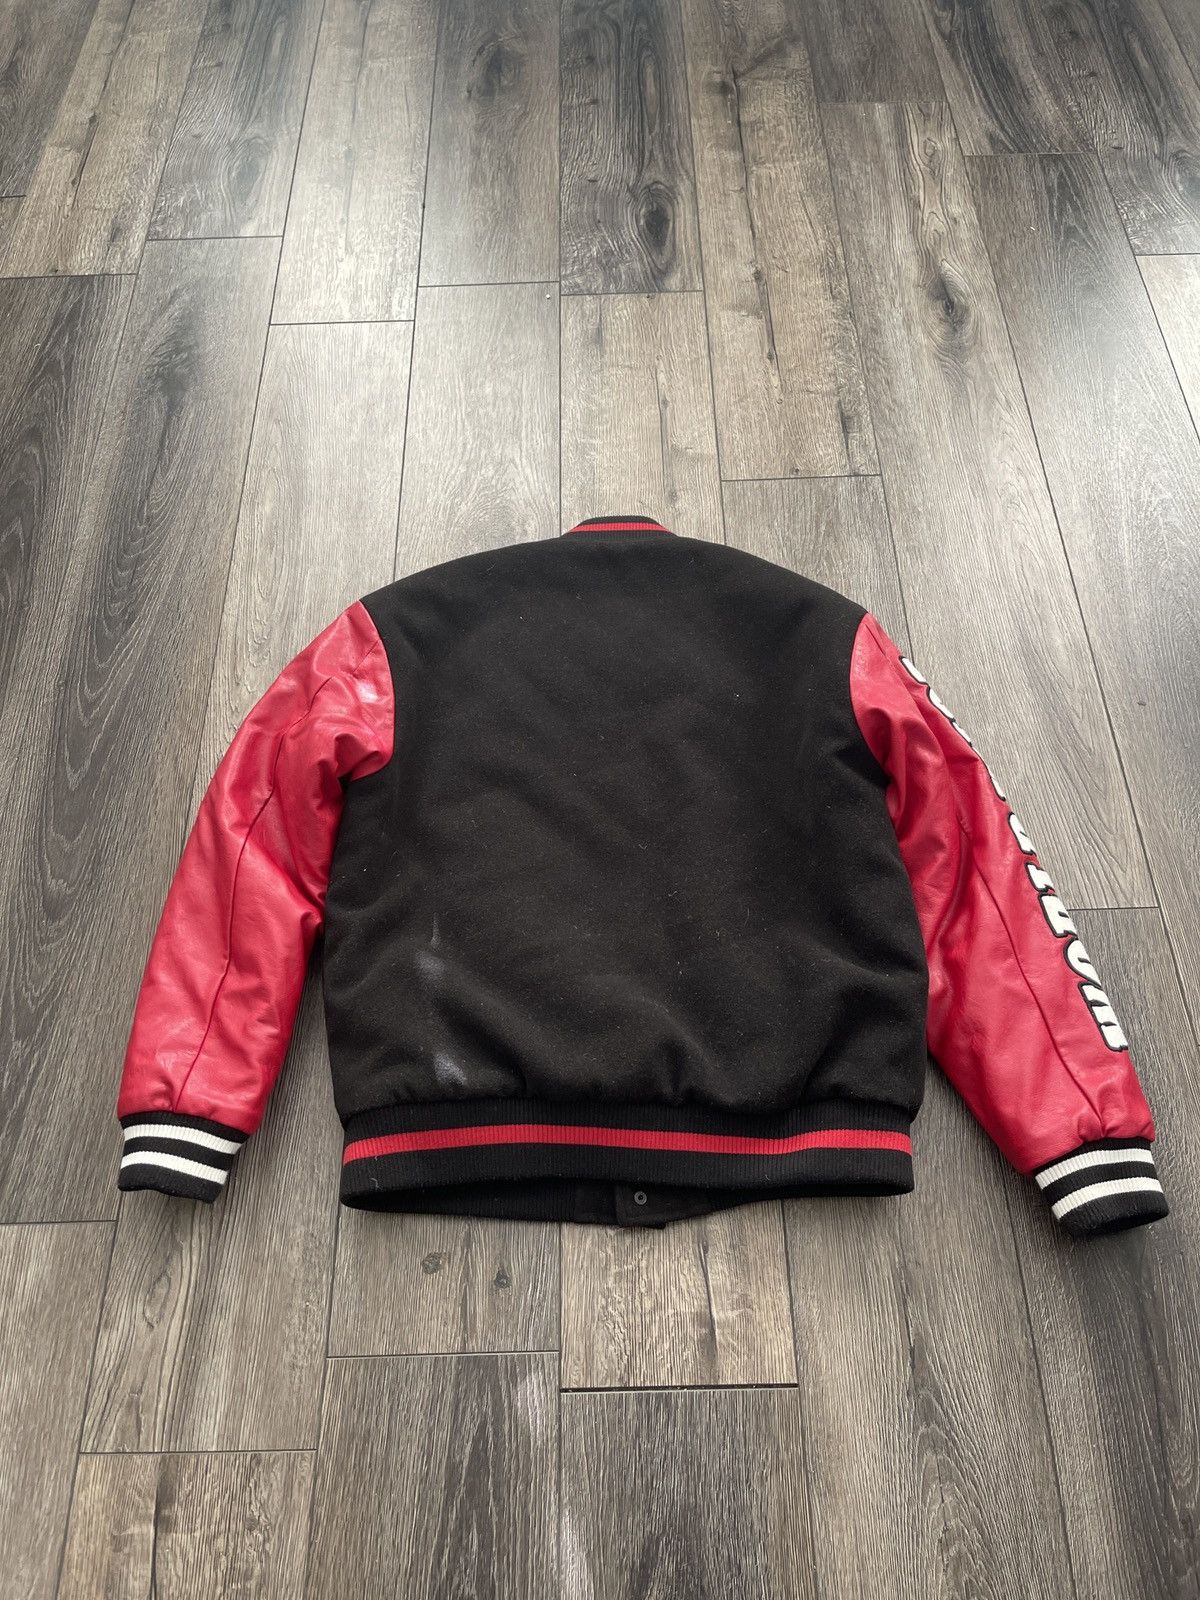 Forever 21 Varsity jacket Size US S / EU 44-46 / 1 - 5 Preview